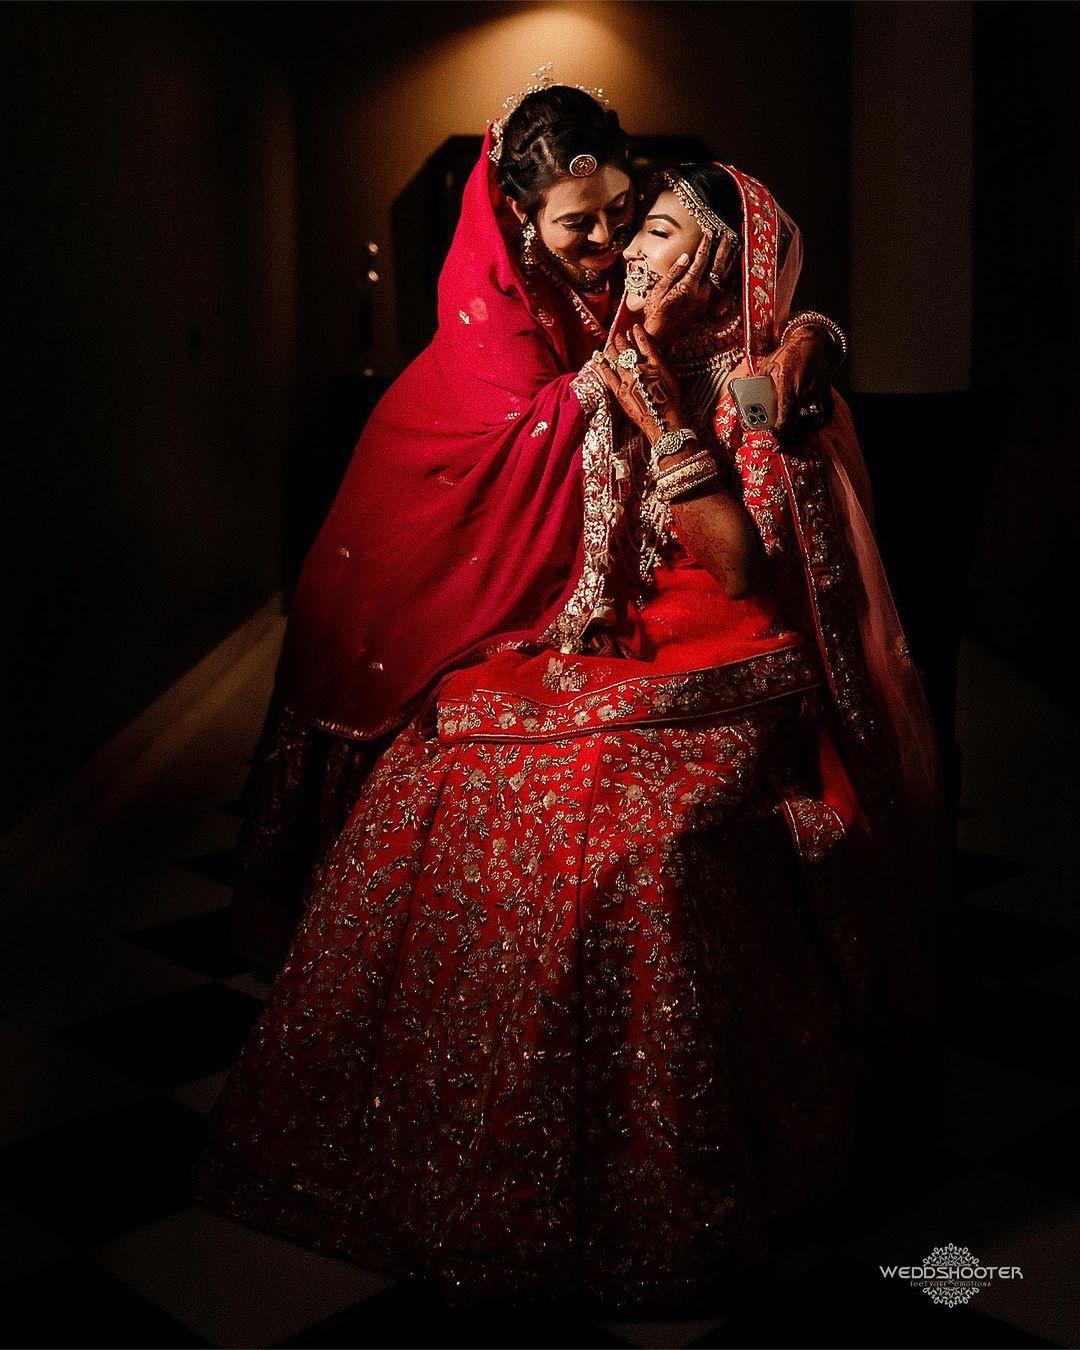 Some photo poses ideas for bride and her friends and cousins. | Indian  wedding photography poses, Indian wedding photography couples, Indian  wedding photography